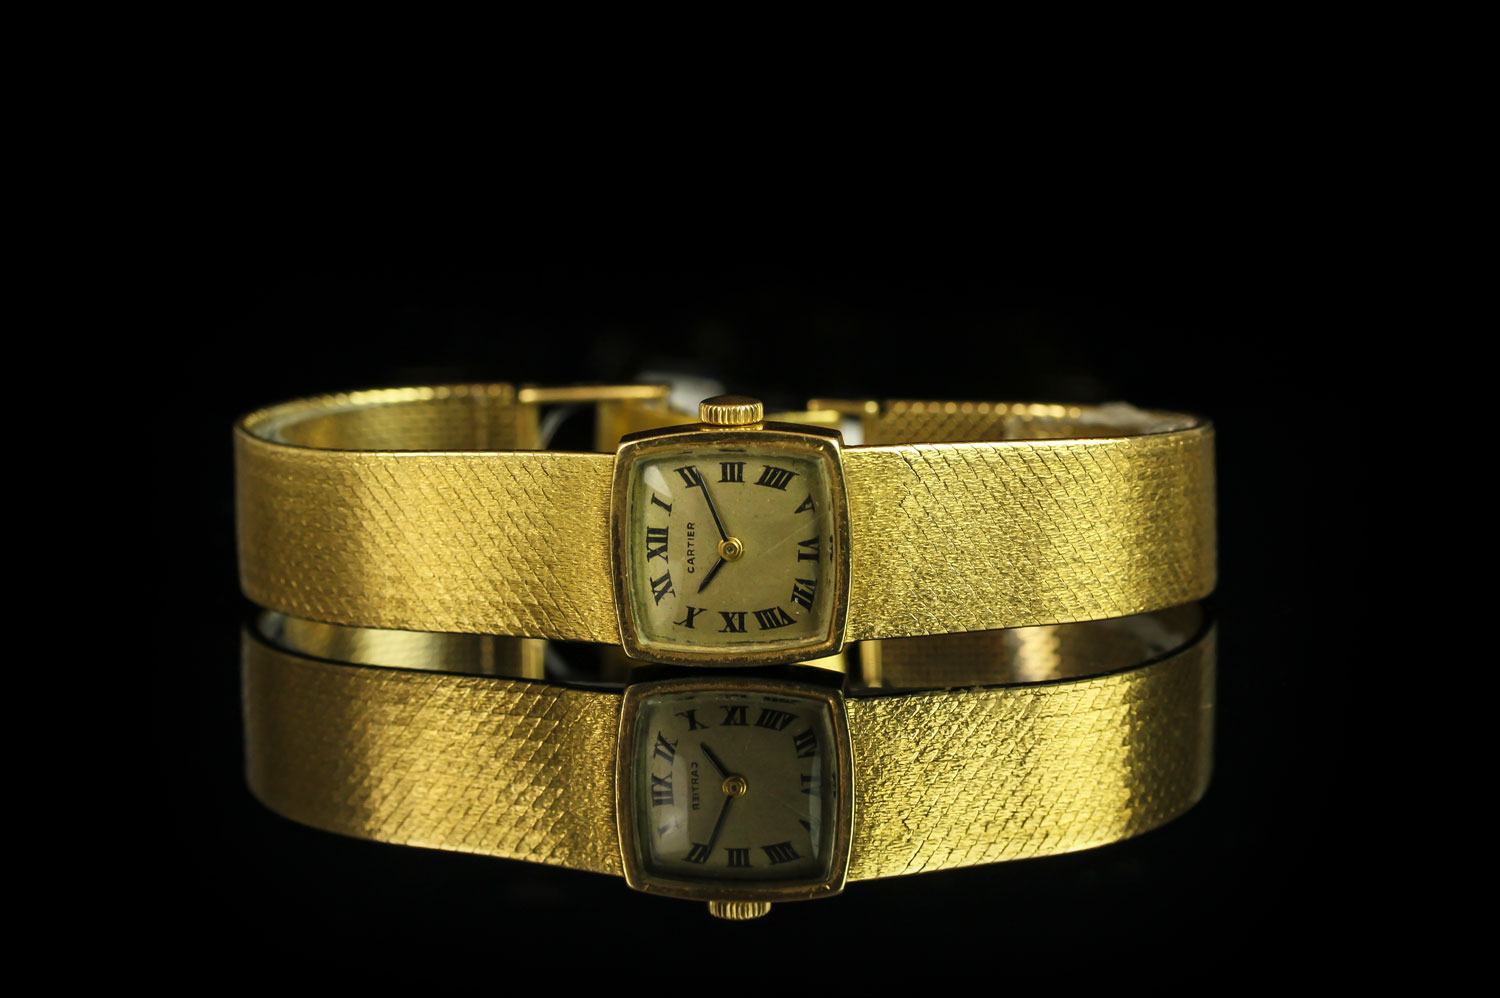 LADIES CARTIER 18CT GOLD WRISTWATCH, square aged dial with black roman numerals and hands, 17mm 18ct